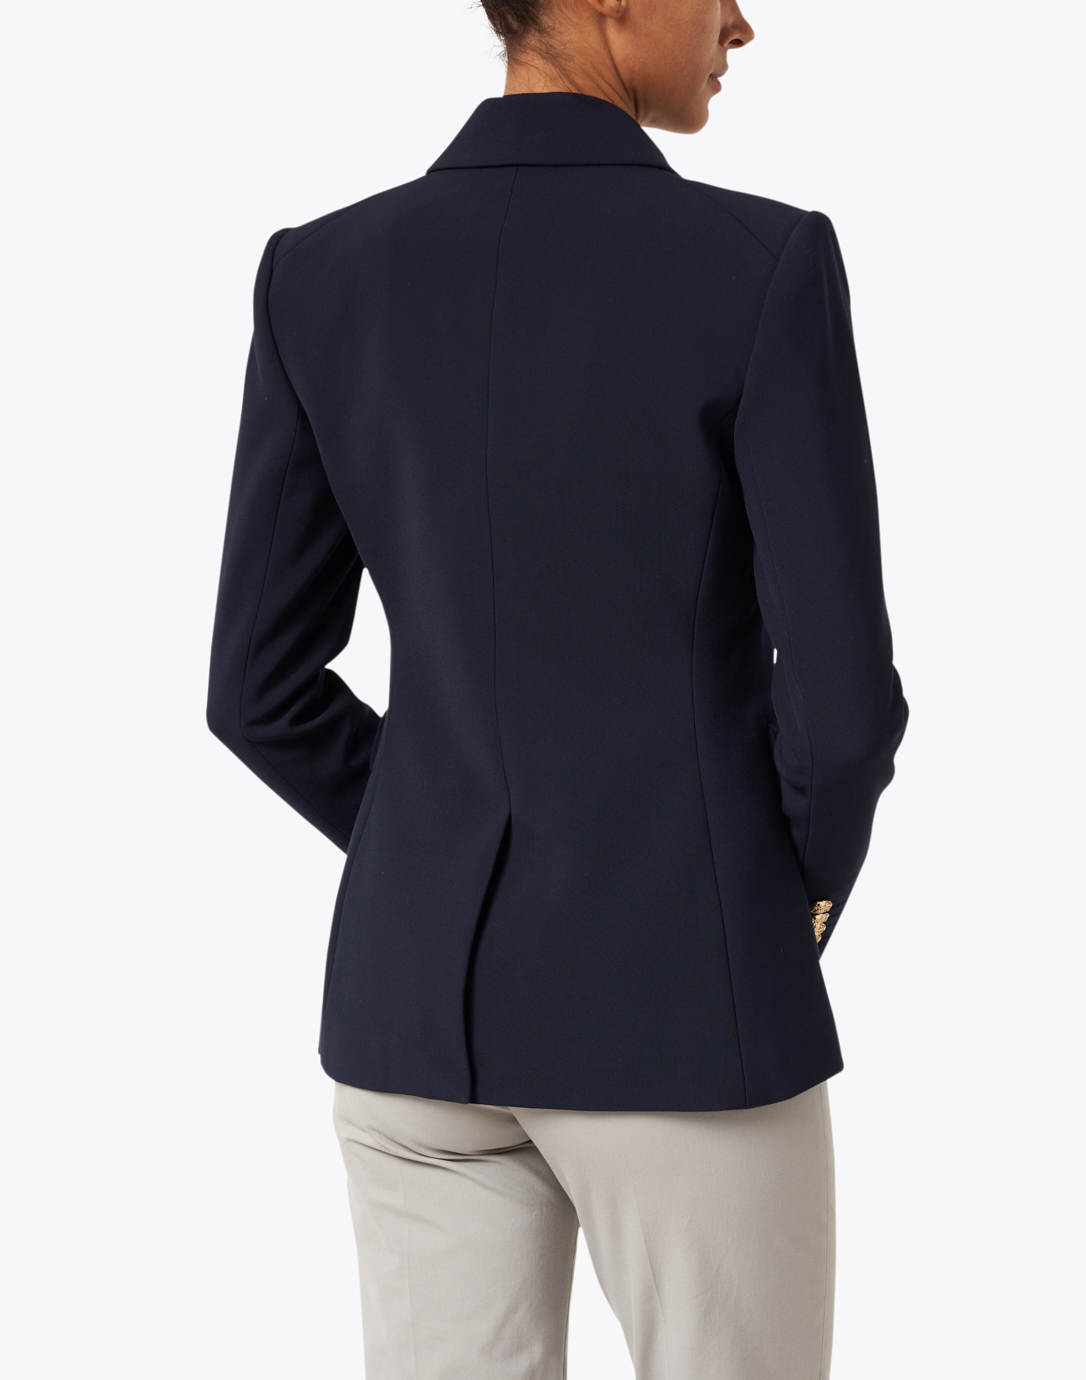 Miller Navy Dickey Jacket with Gold Buttons | Veronica Beard